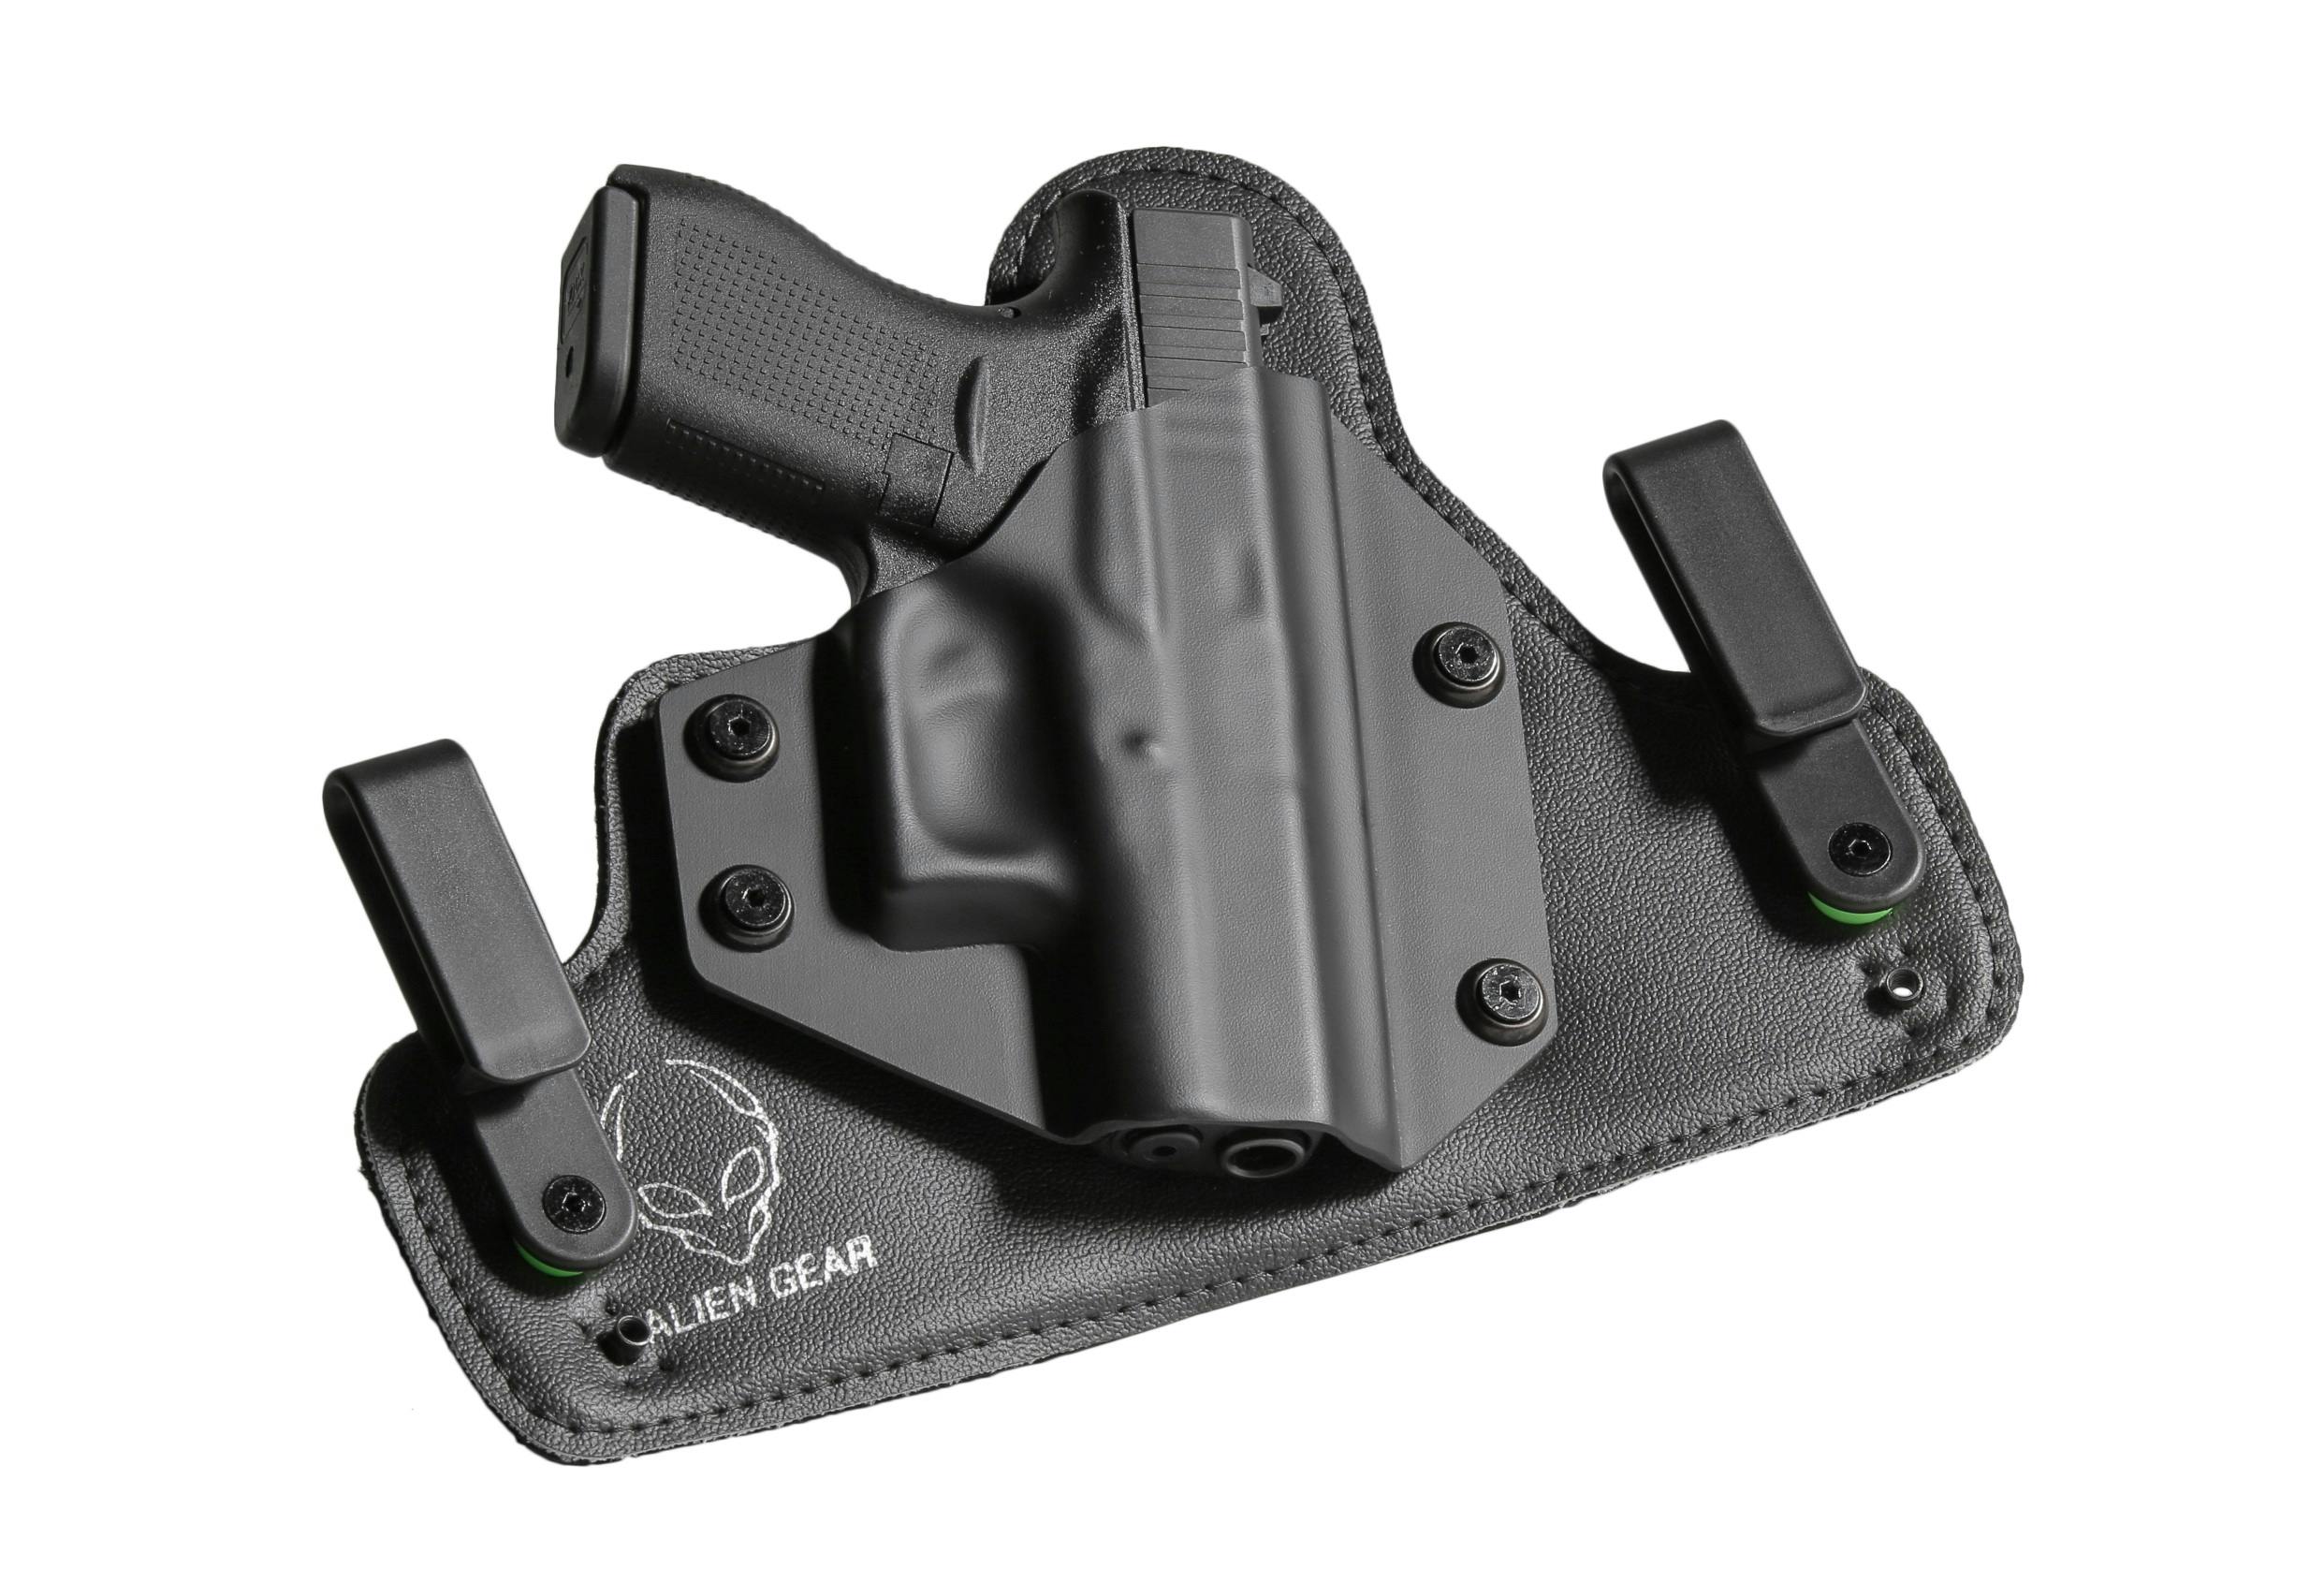 Black Holster With Handgun Free Stock Photo Images, Photos, Reviews